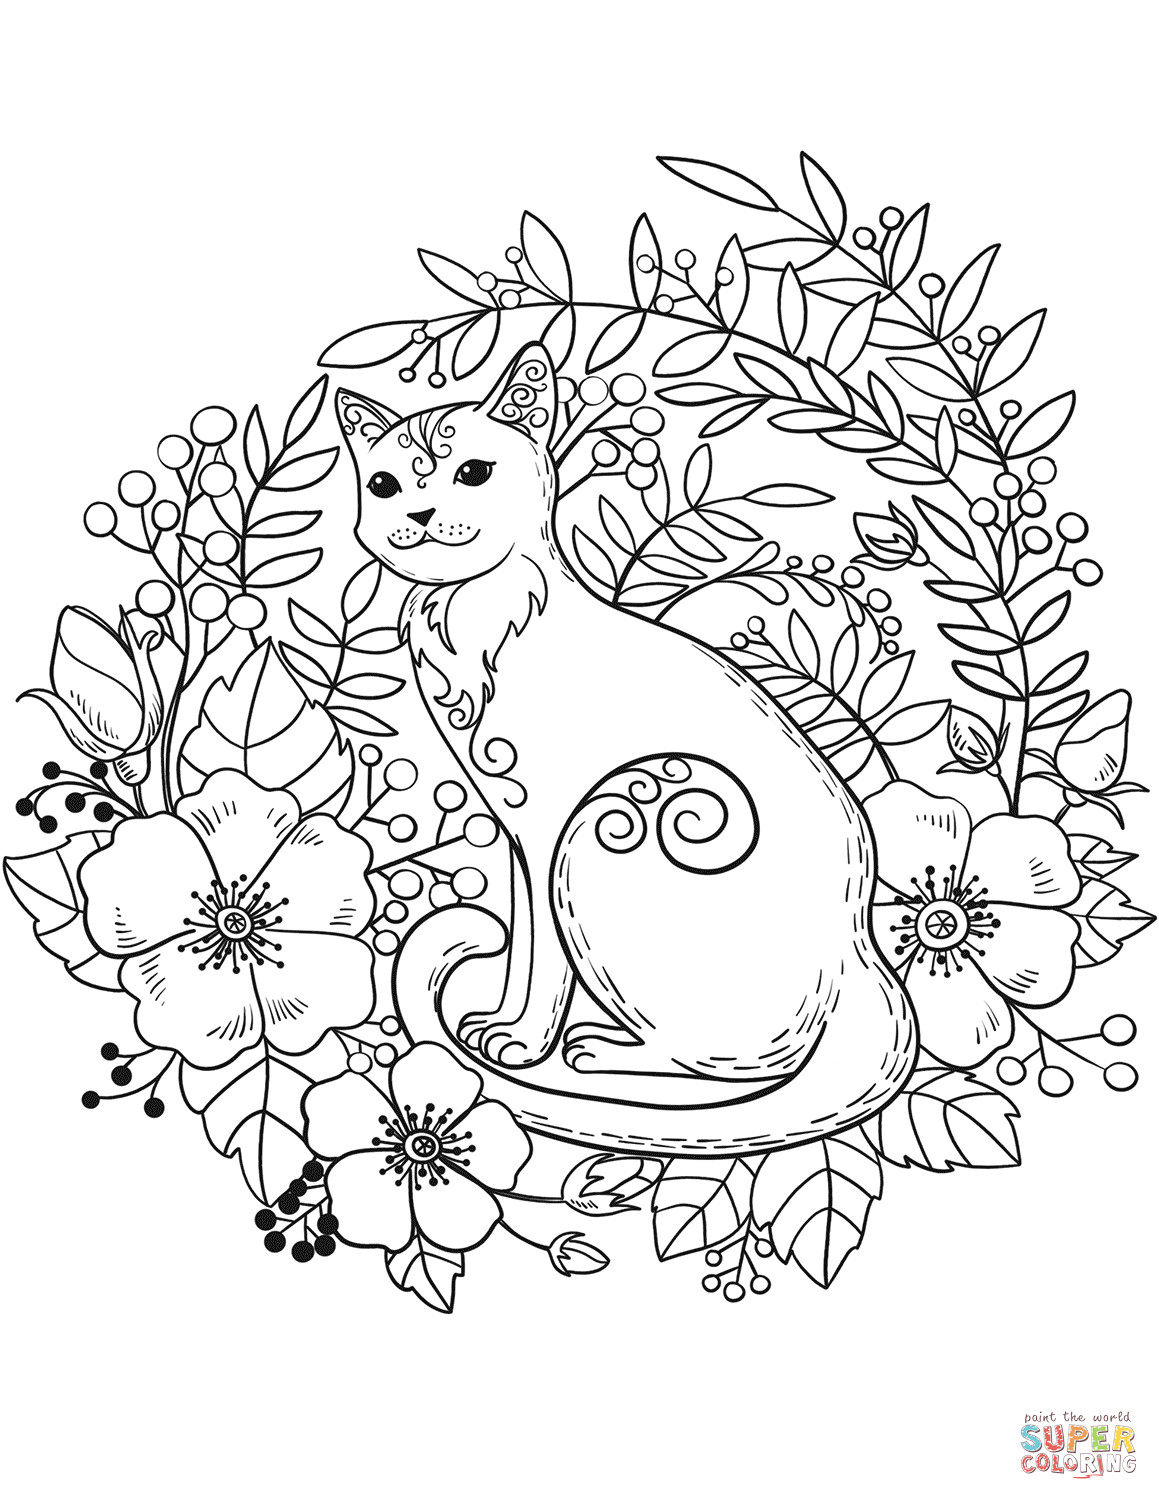 Printable Coloring Pages Cats
 Cat coloring page